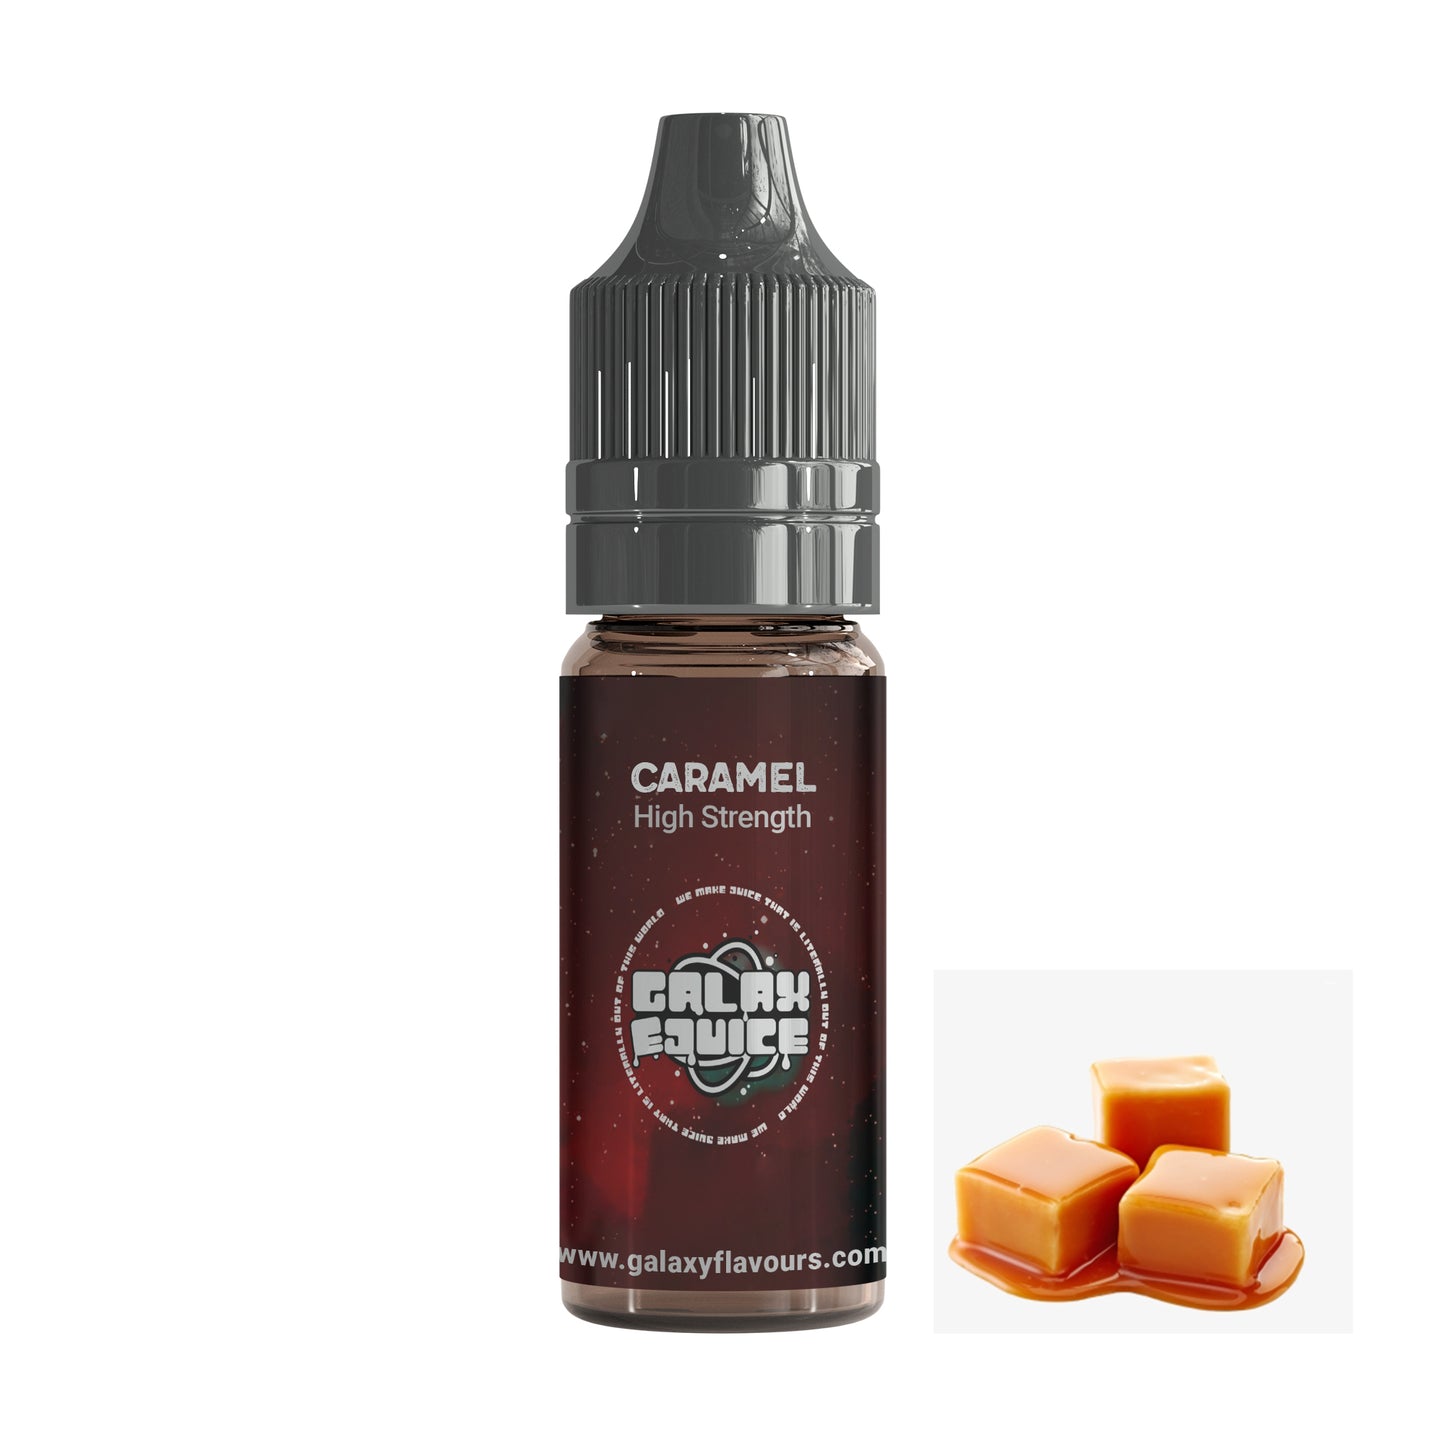 Caramel High Strength Professional Flavouring.